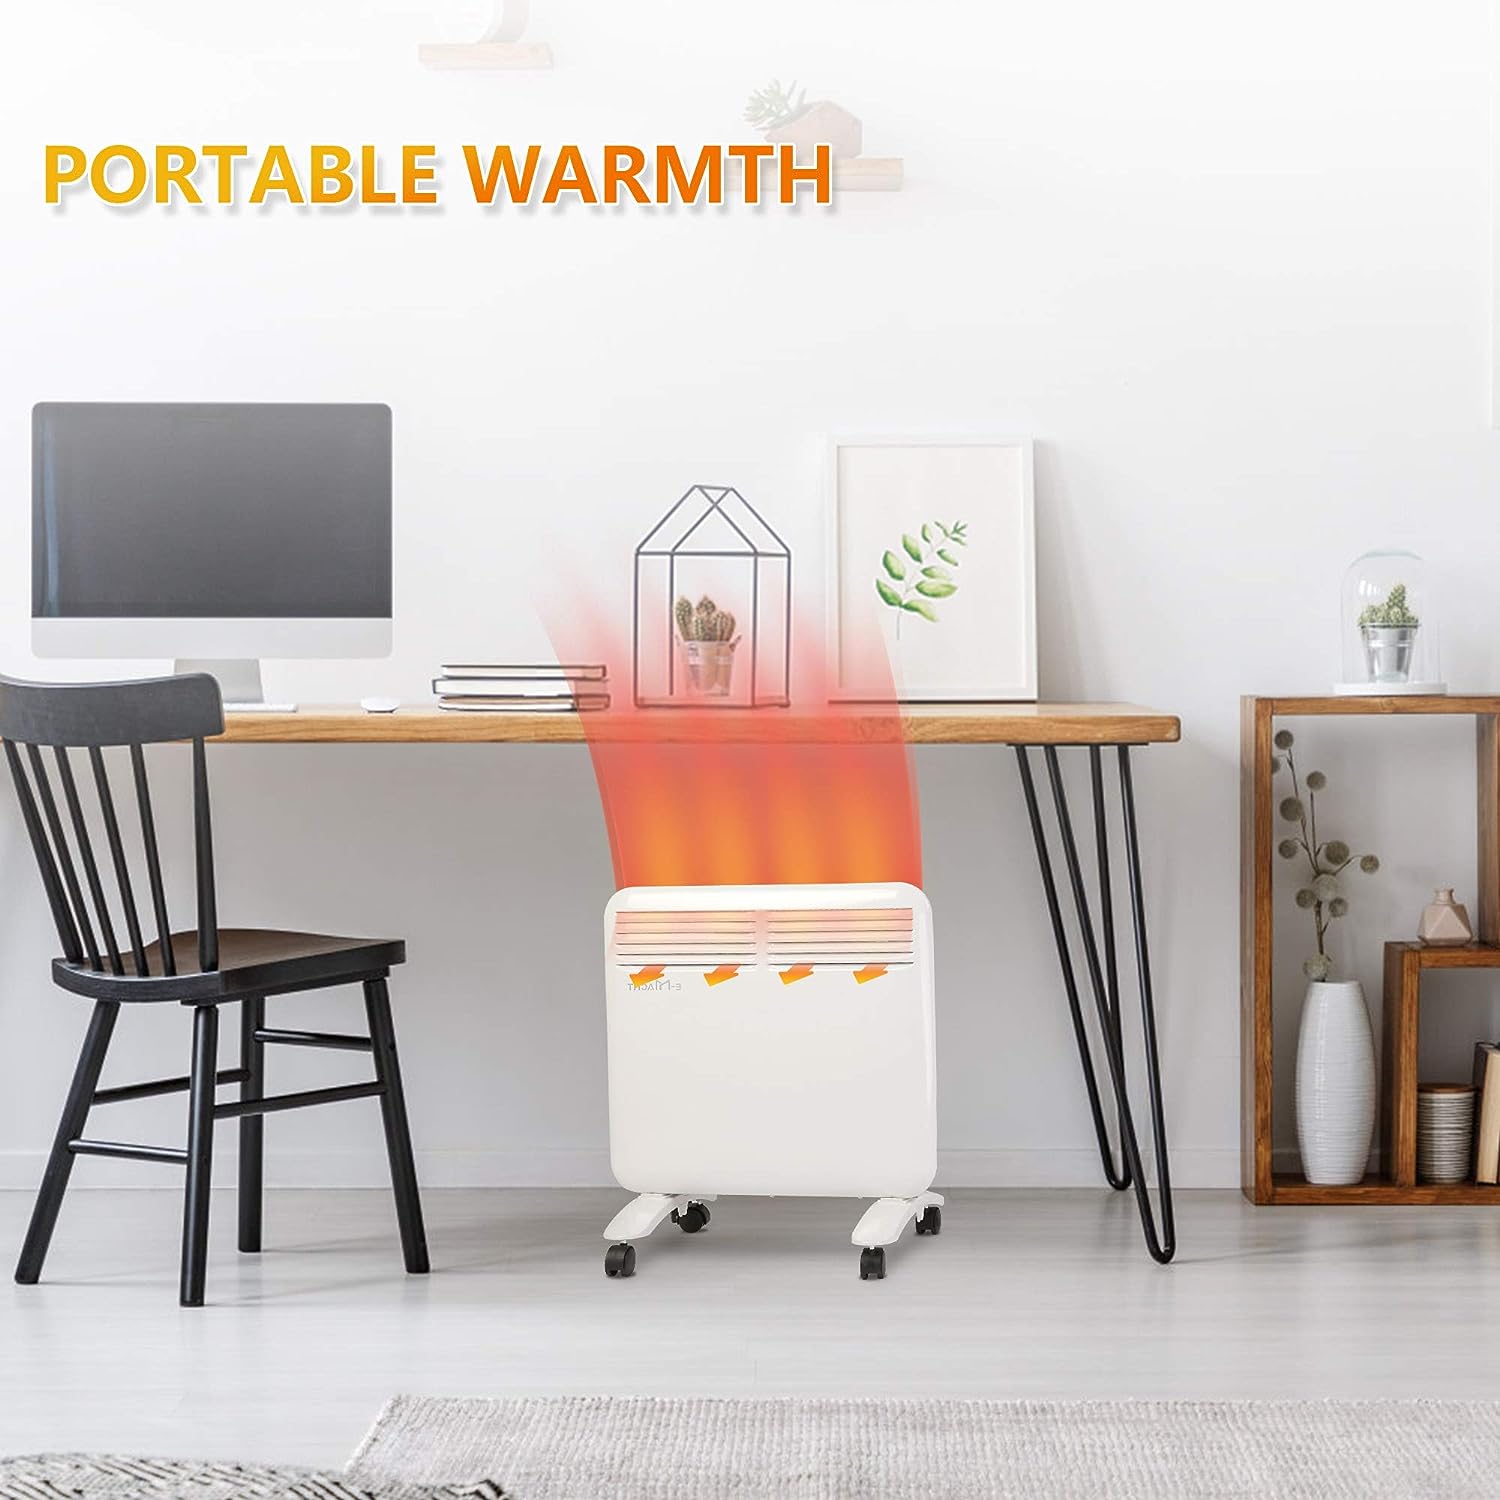 750W Wall-Mounted Space Heater with Adjustable Thermostat, Portable Convection Freestanding Heater